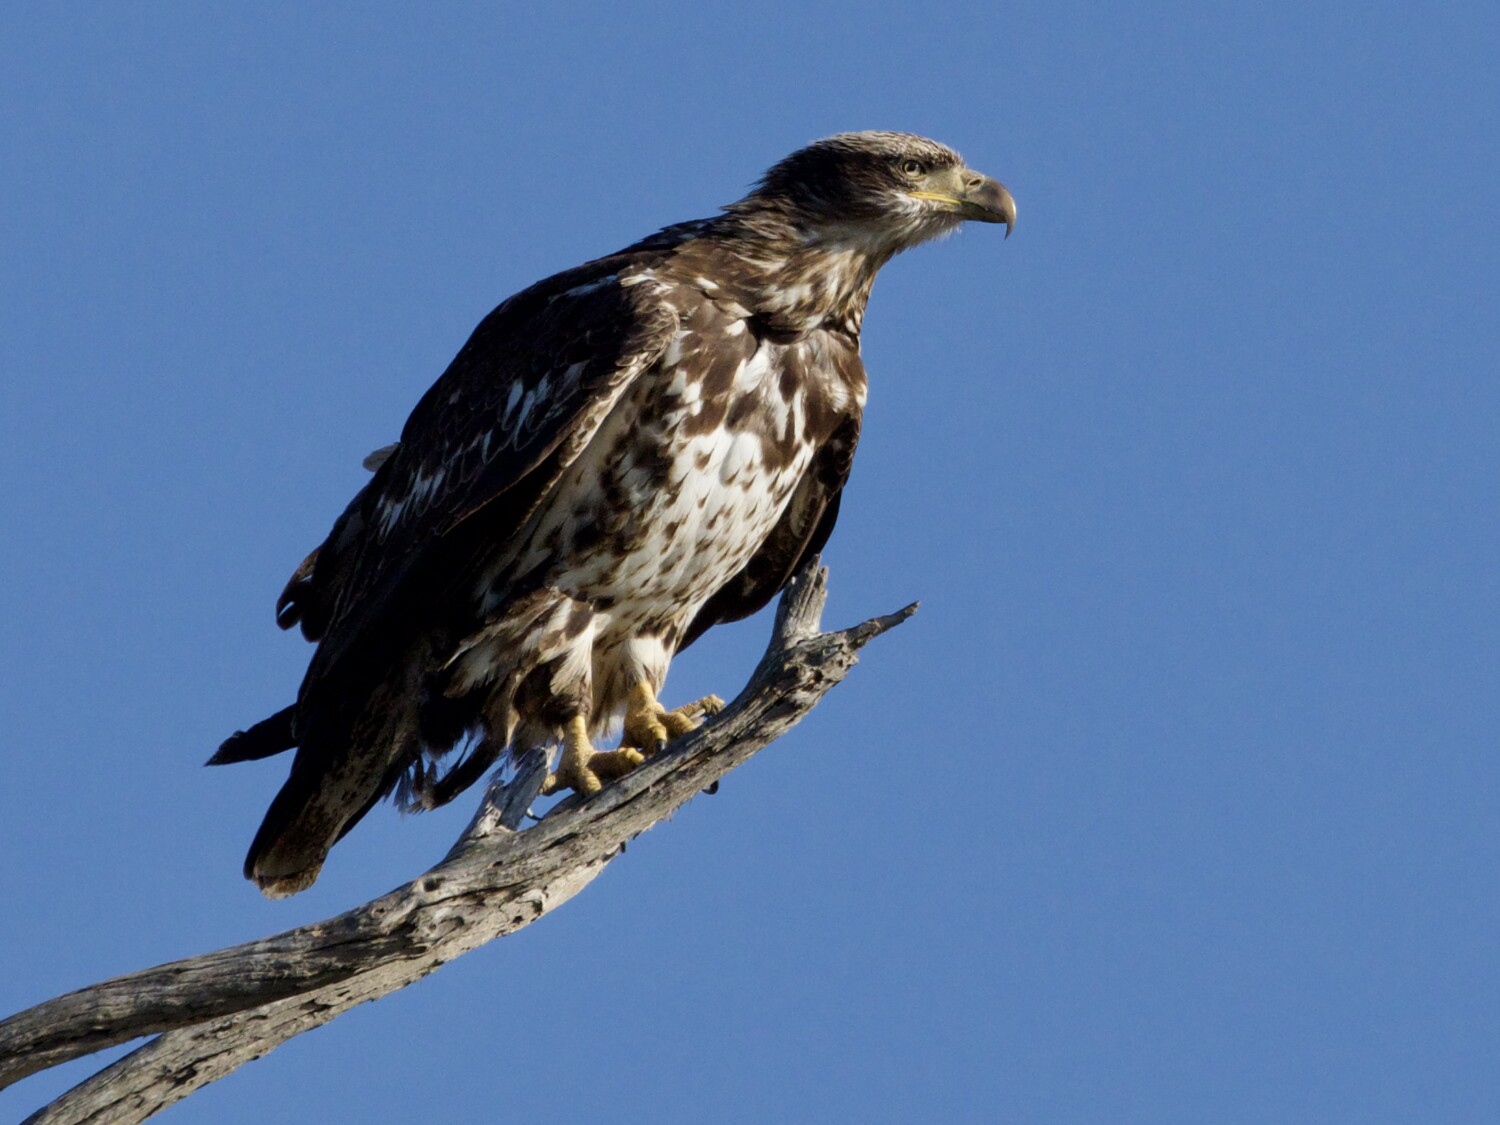 Immature Bald Eagle on Branch at Bolsa Chica